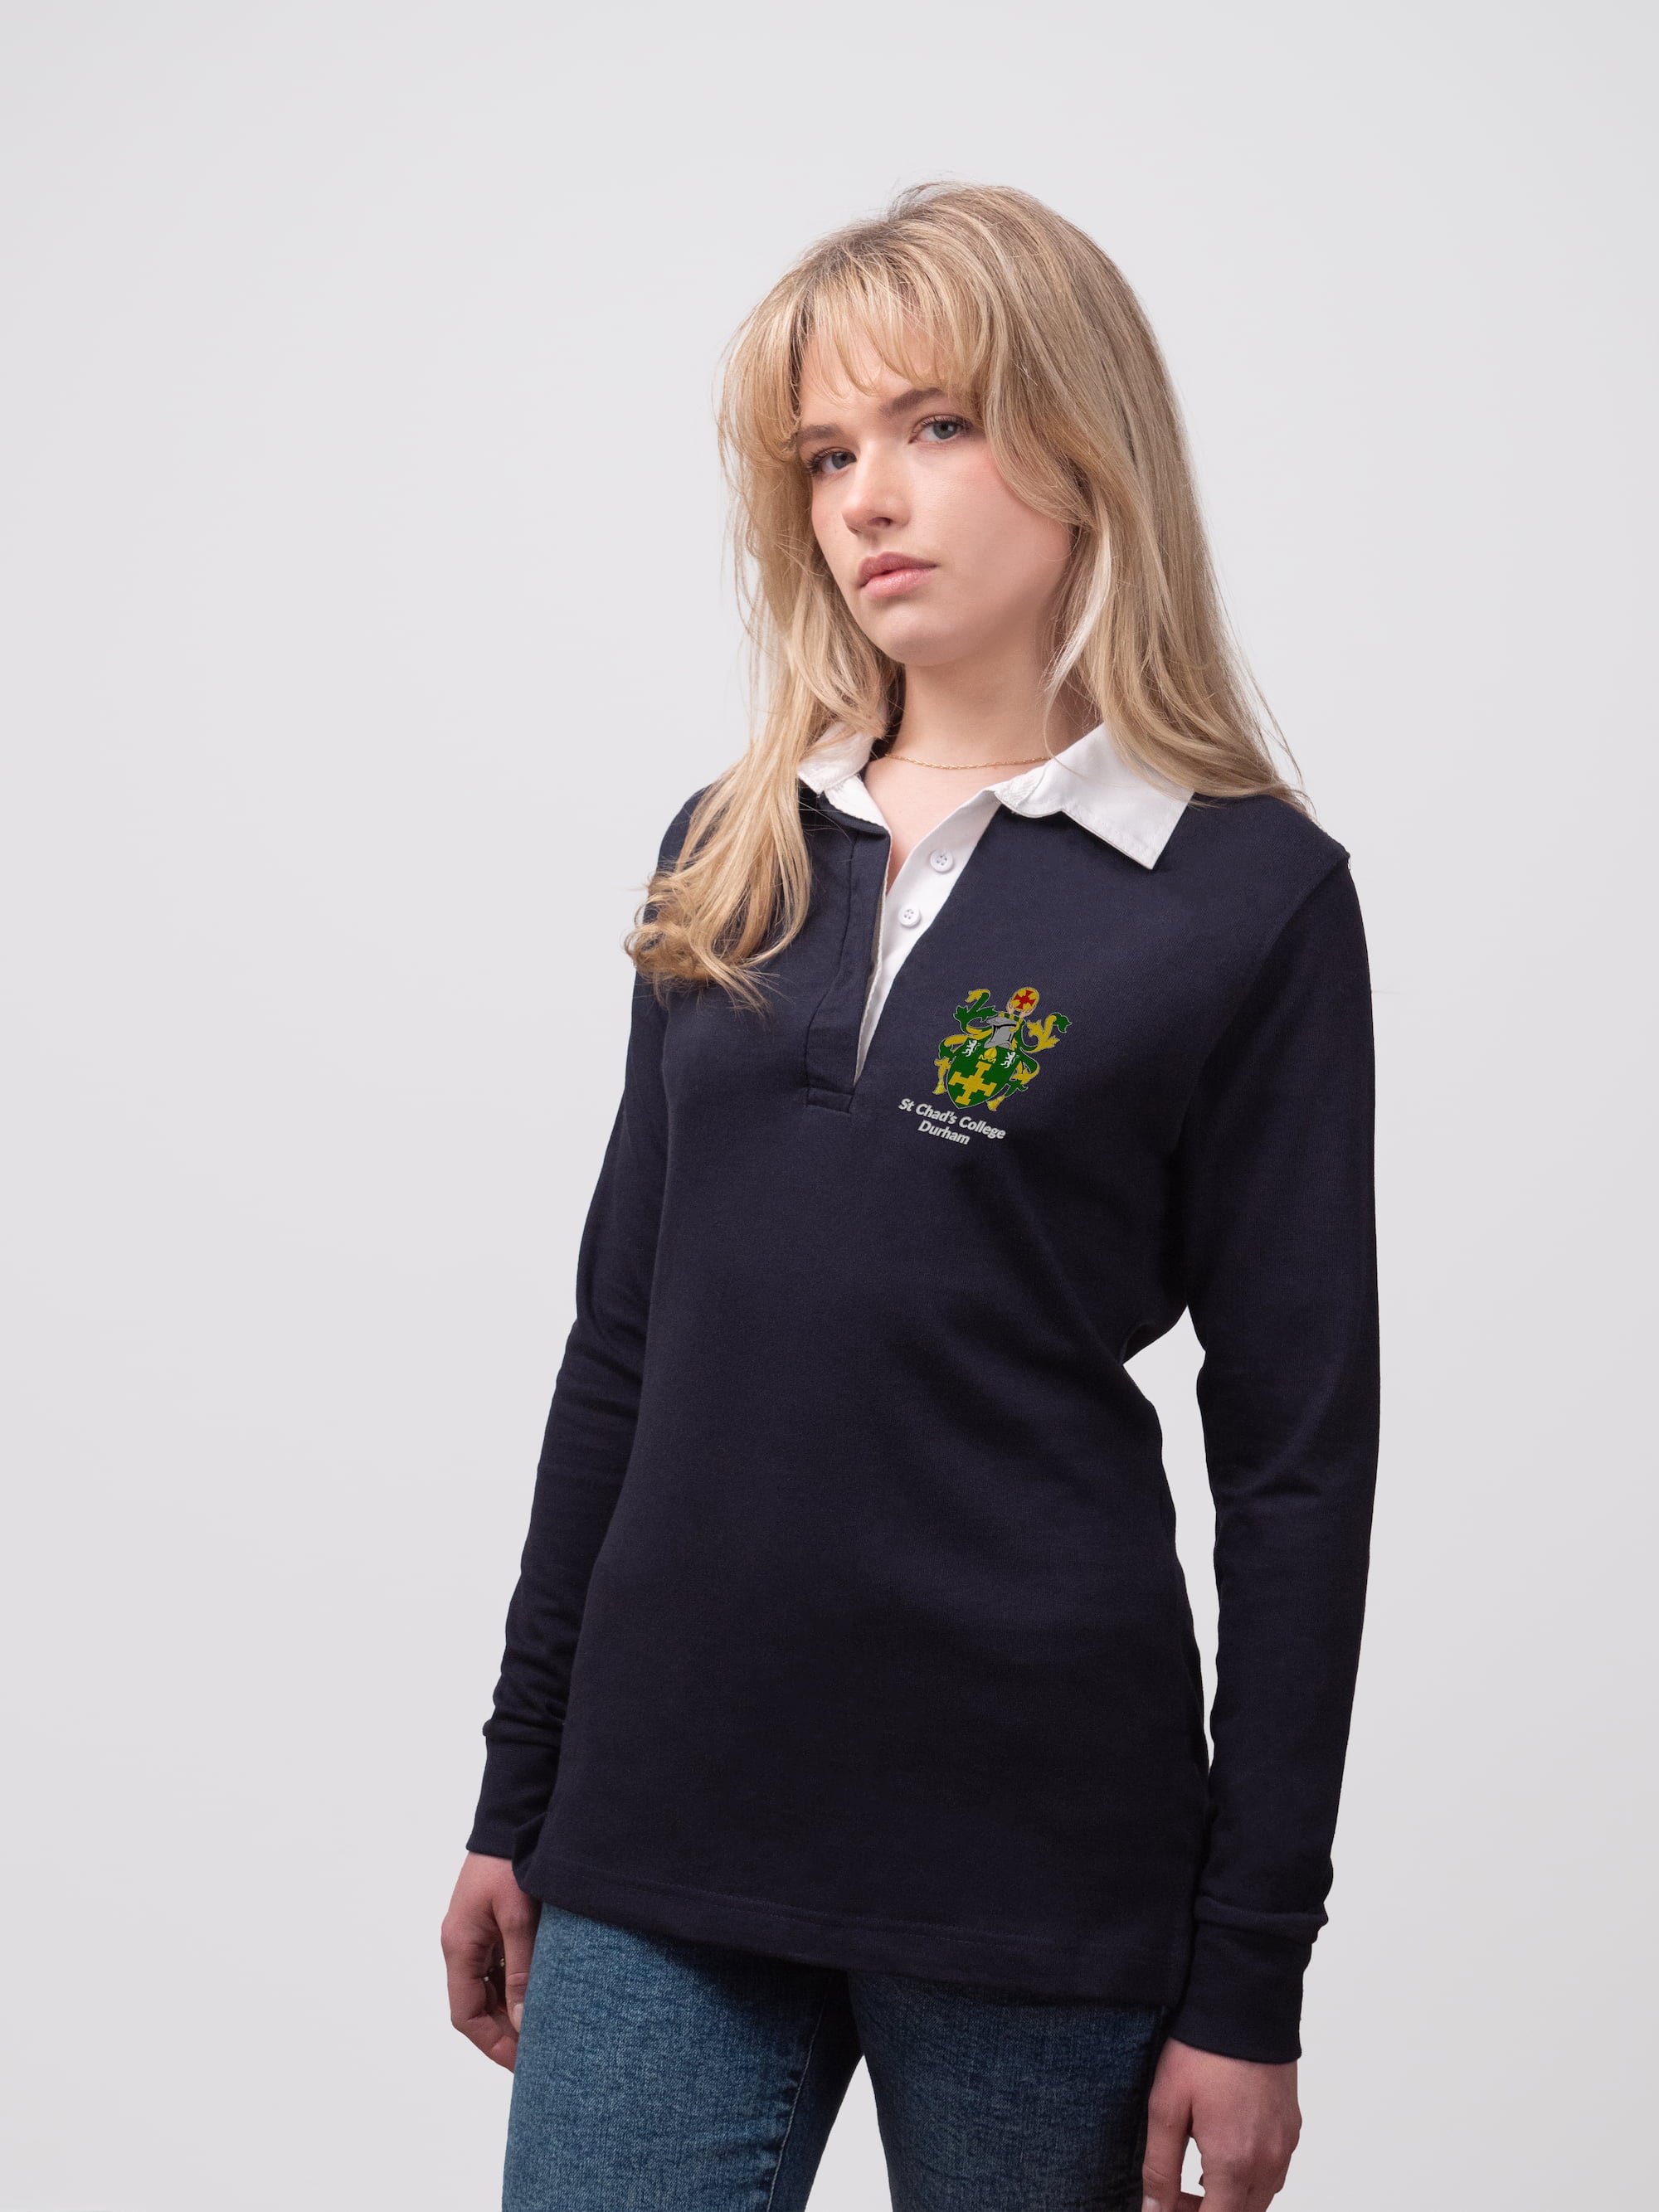 Student wearing a navy St Chad's College rugby shirt with embroidered crest